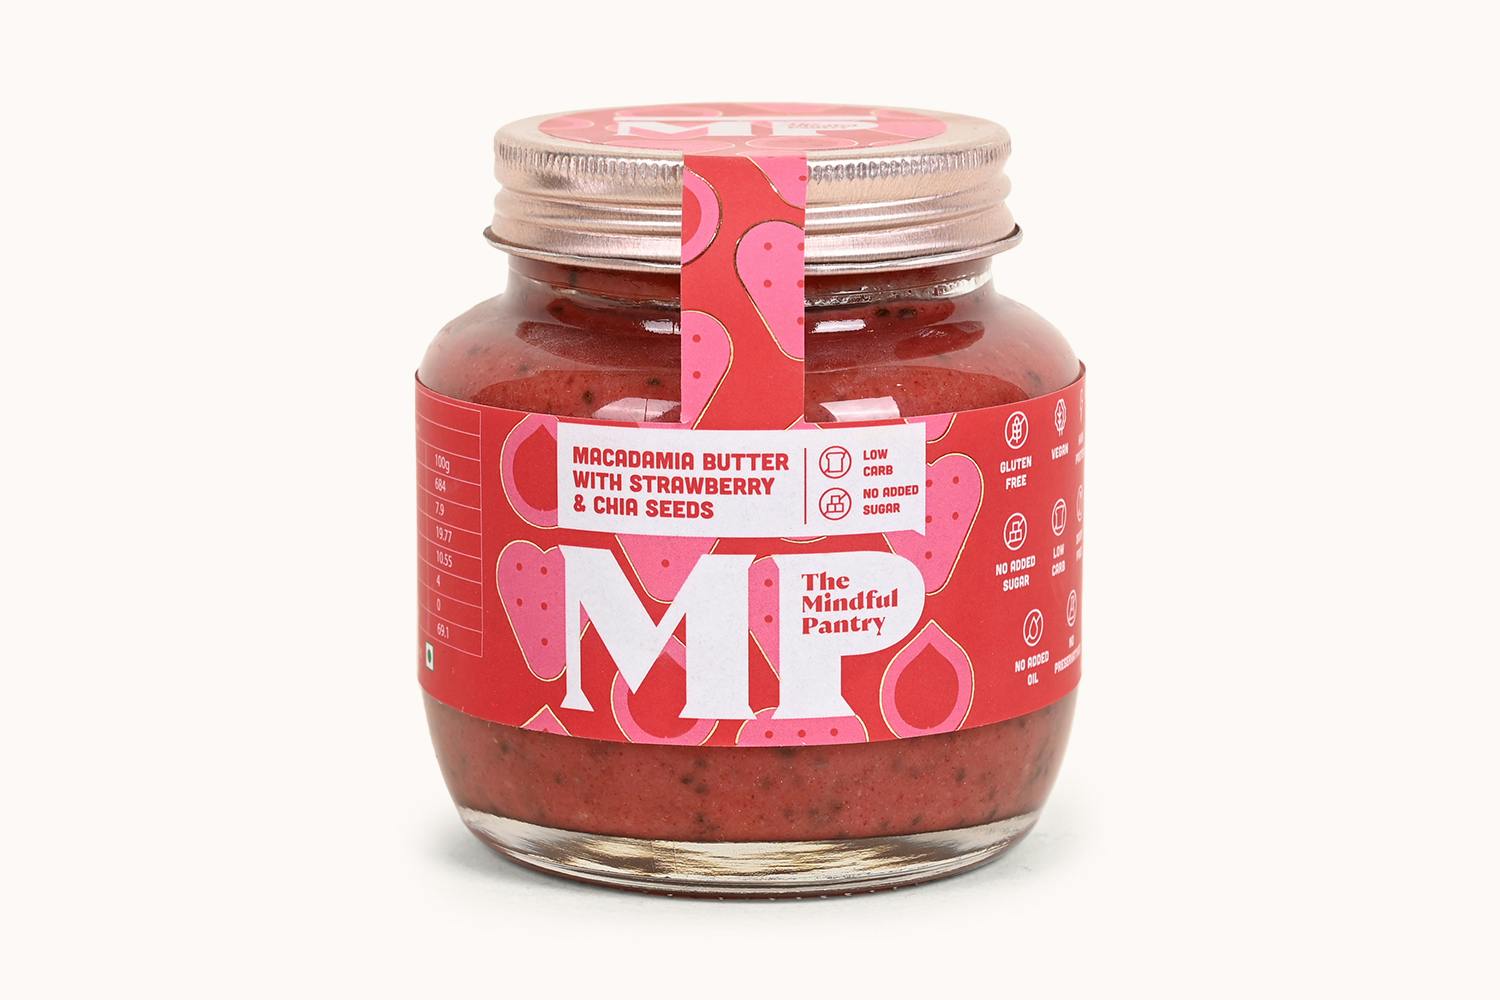 The Mindful Pantry Macadamia Butter with Strawberry and Chia Seeds